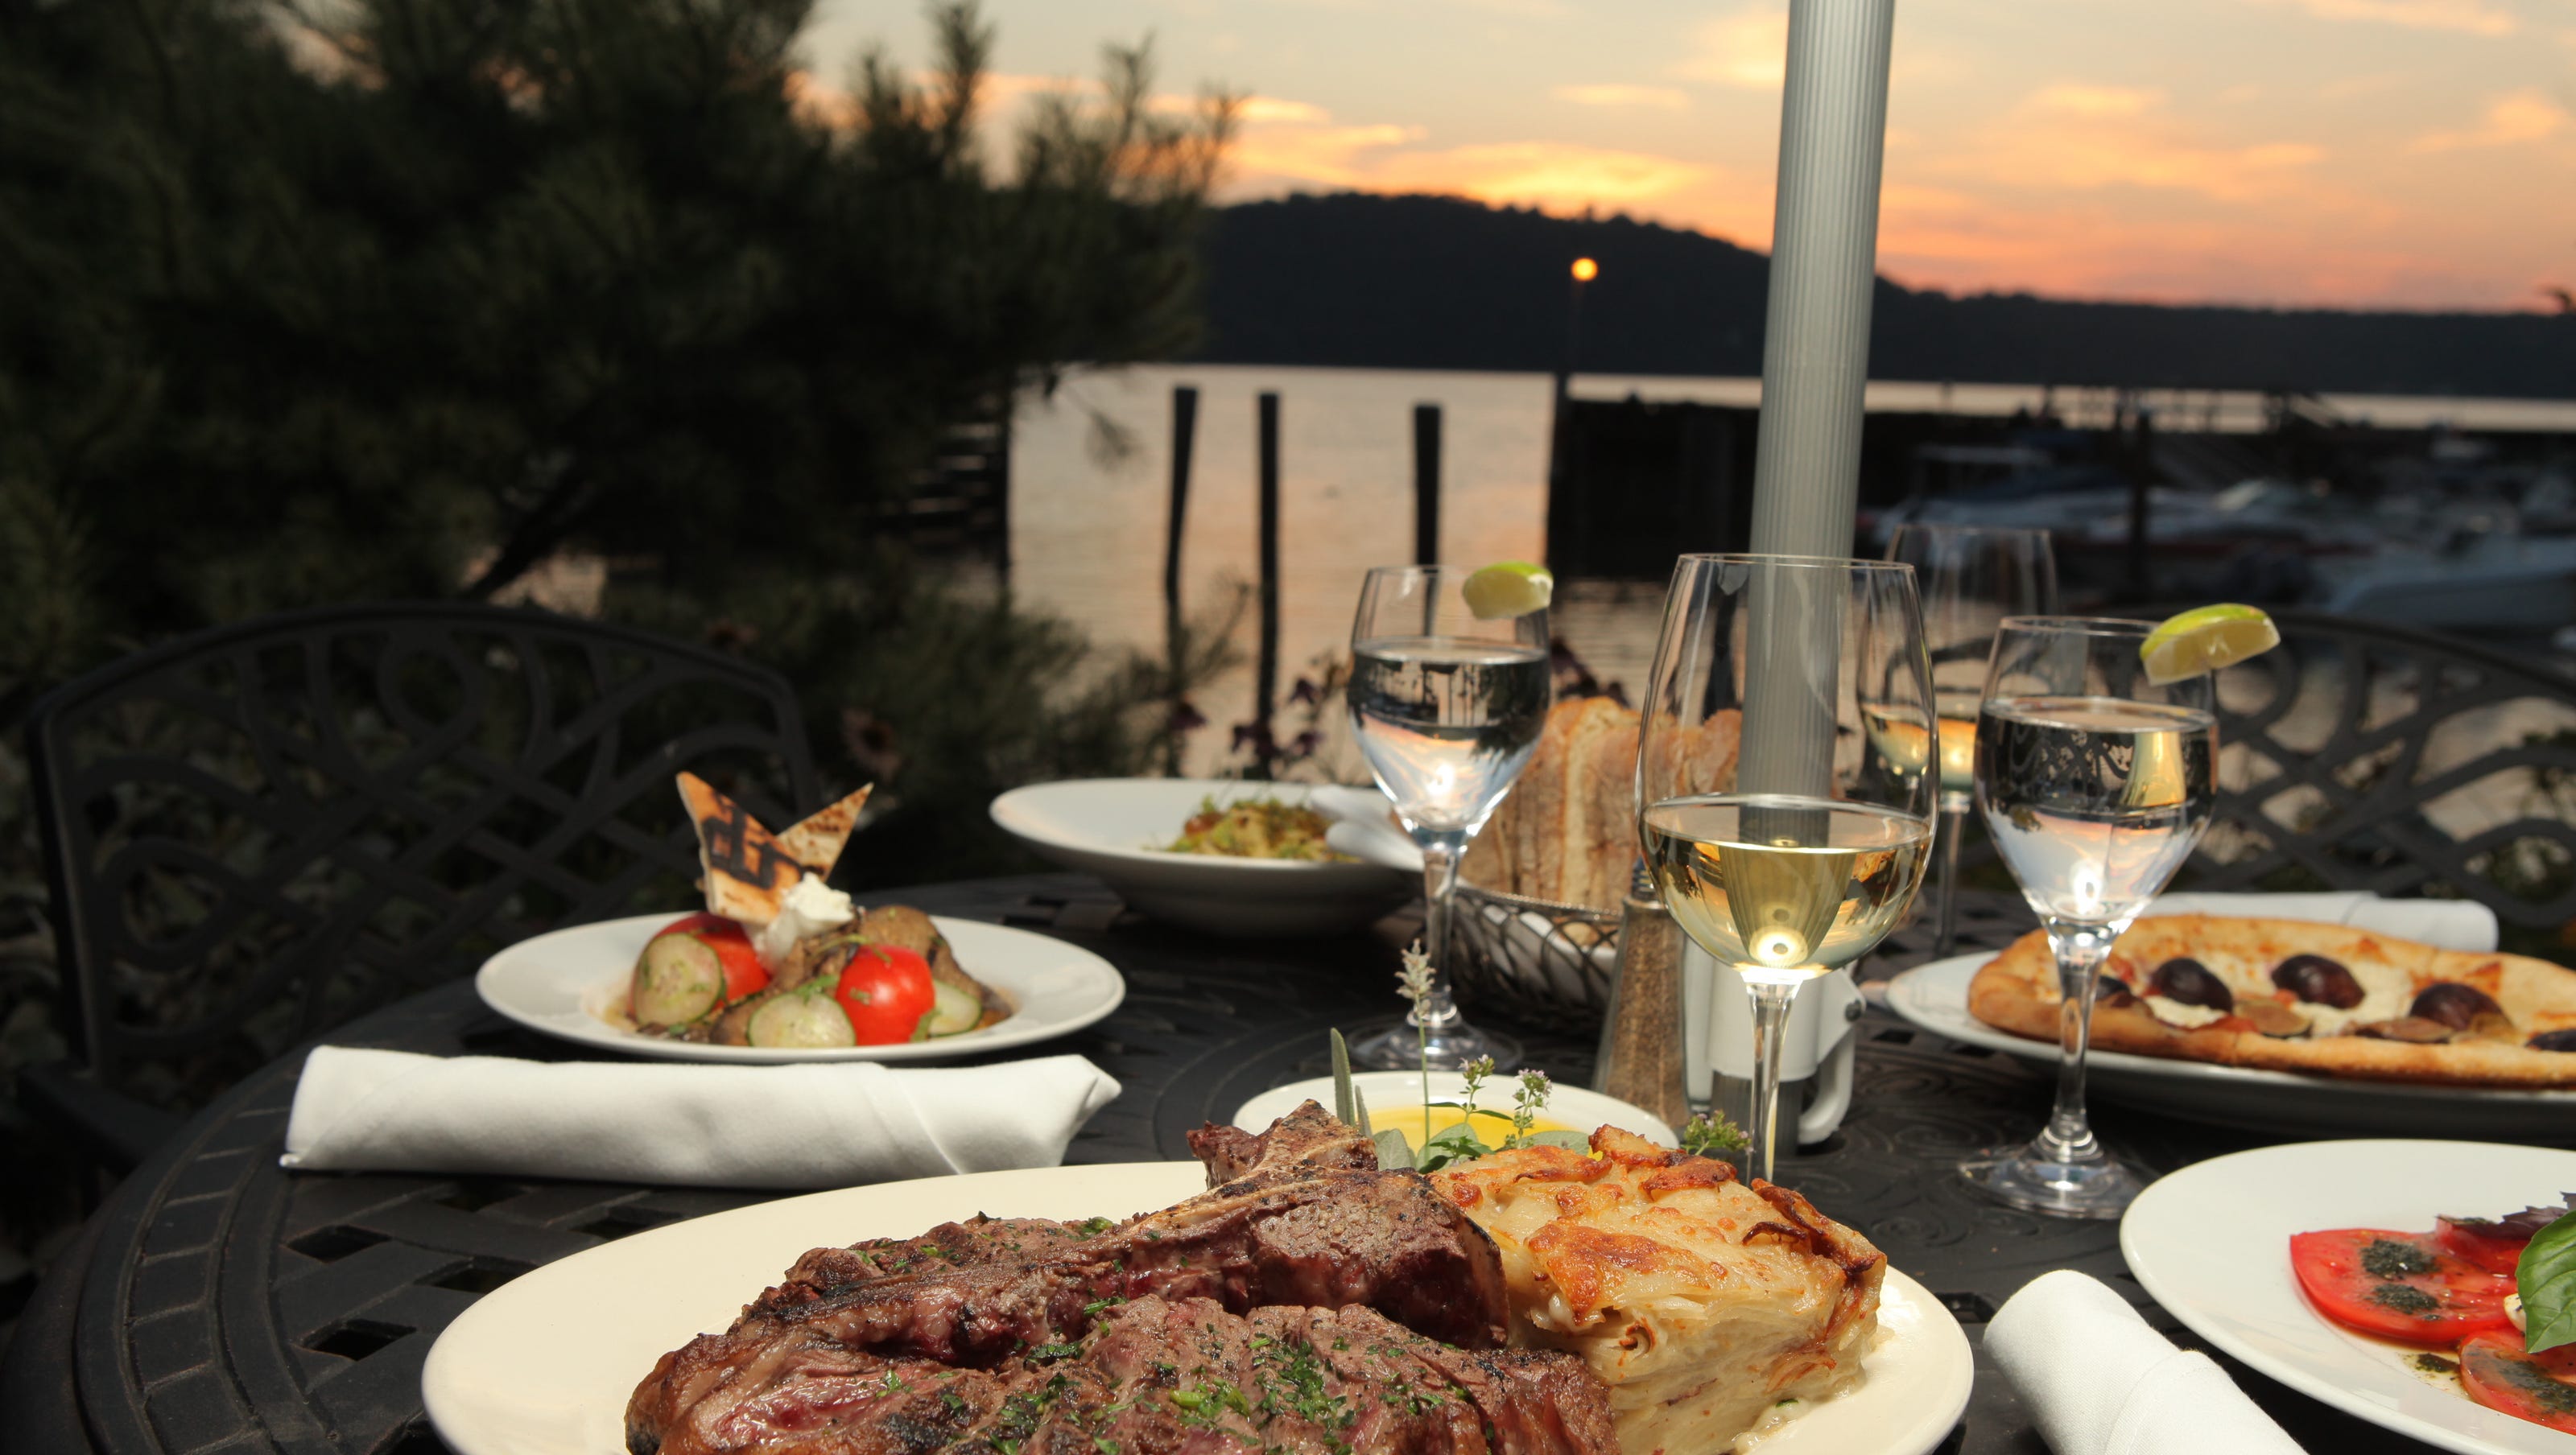 Waterfront Restaurants In The Lower Hudson Valley